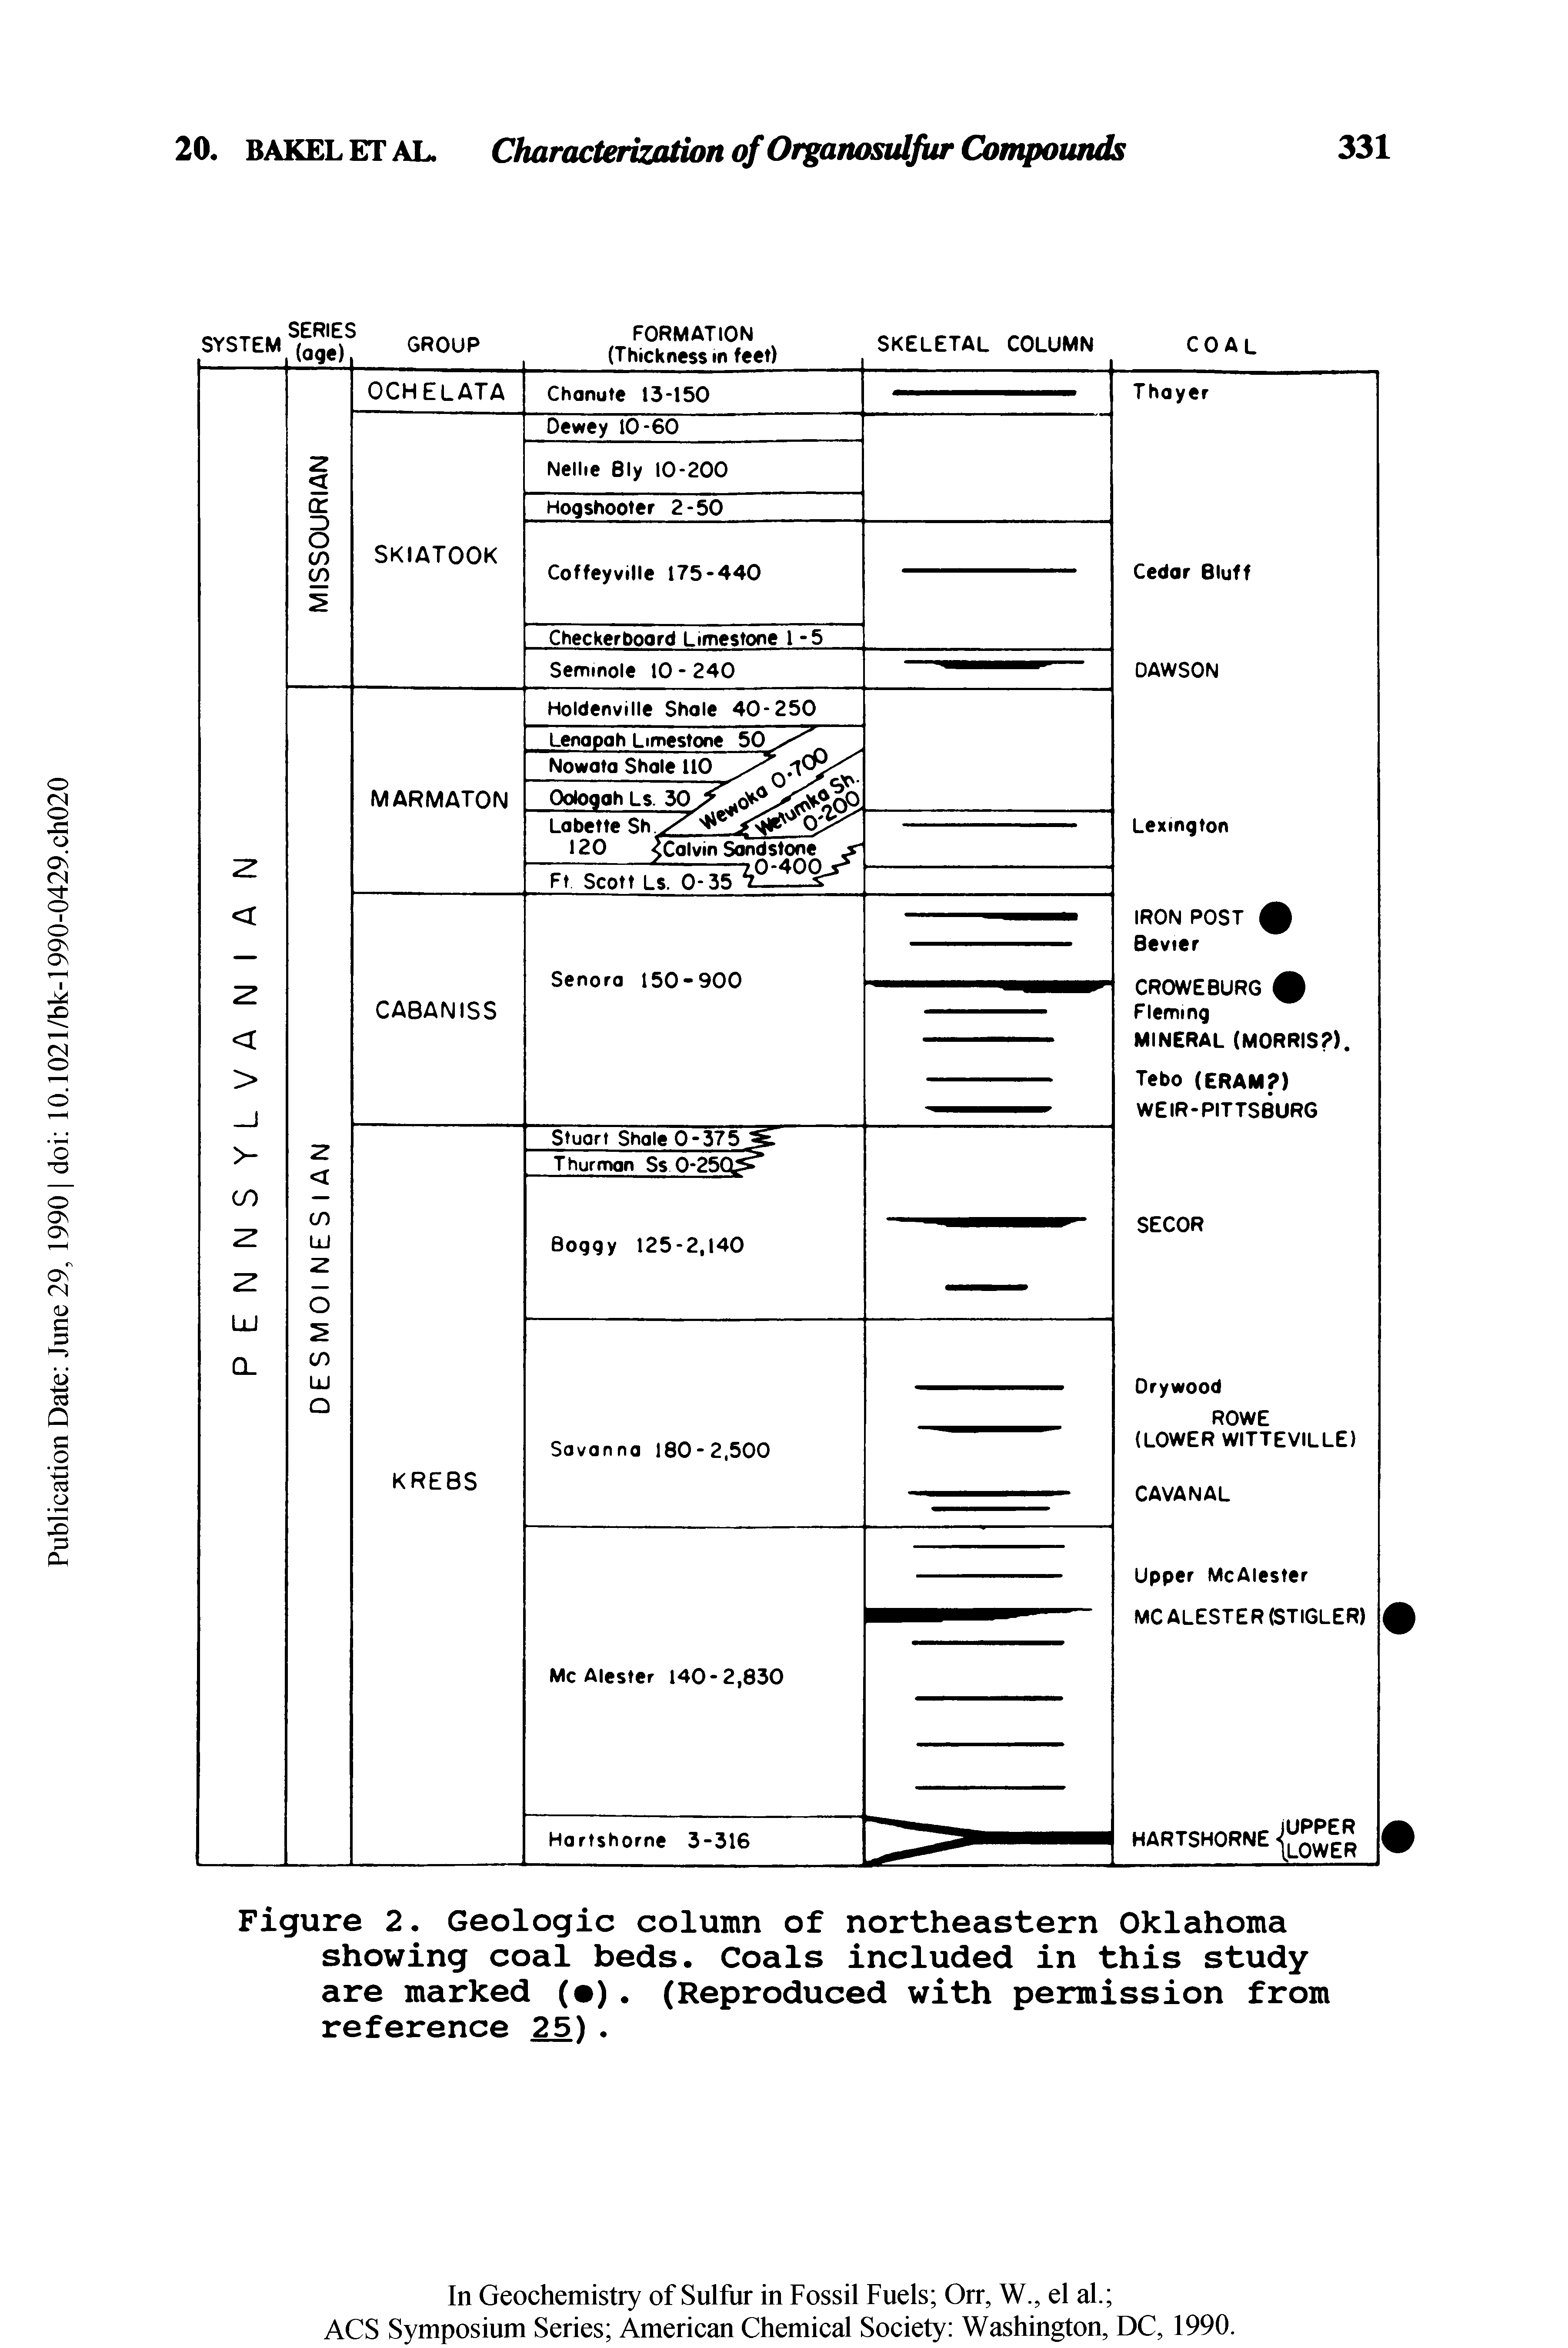 Figure 2. Geologic column of northeastern Oklahoma showing coal beds. Coals included in this study are marked ( ). (Reproduced with permission from reference 25).